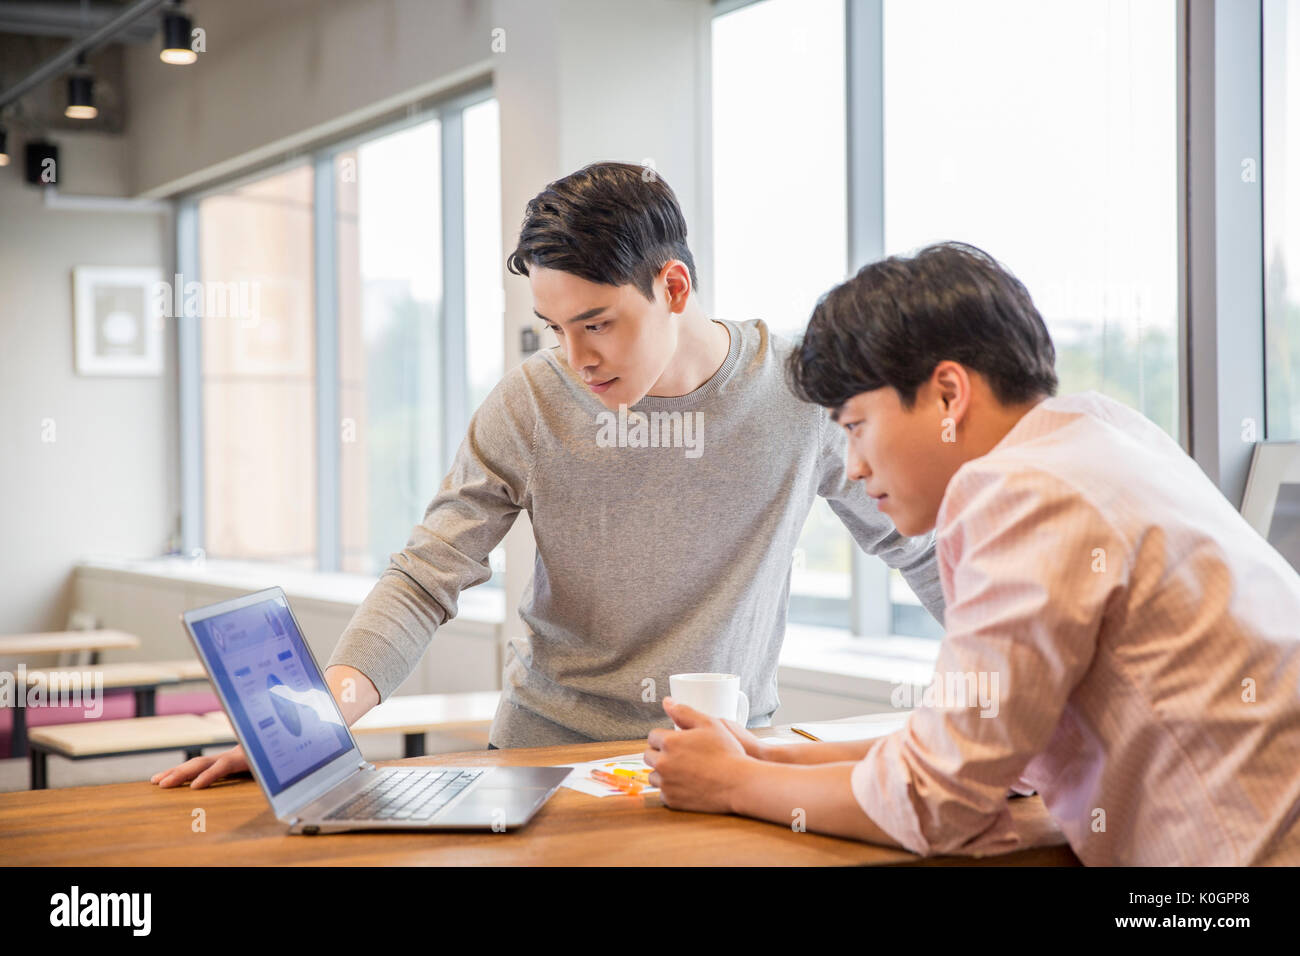 Side view of two businessmen sharing a notebook computer at office Stock Photo